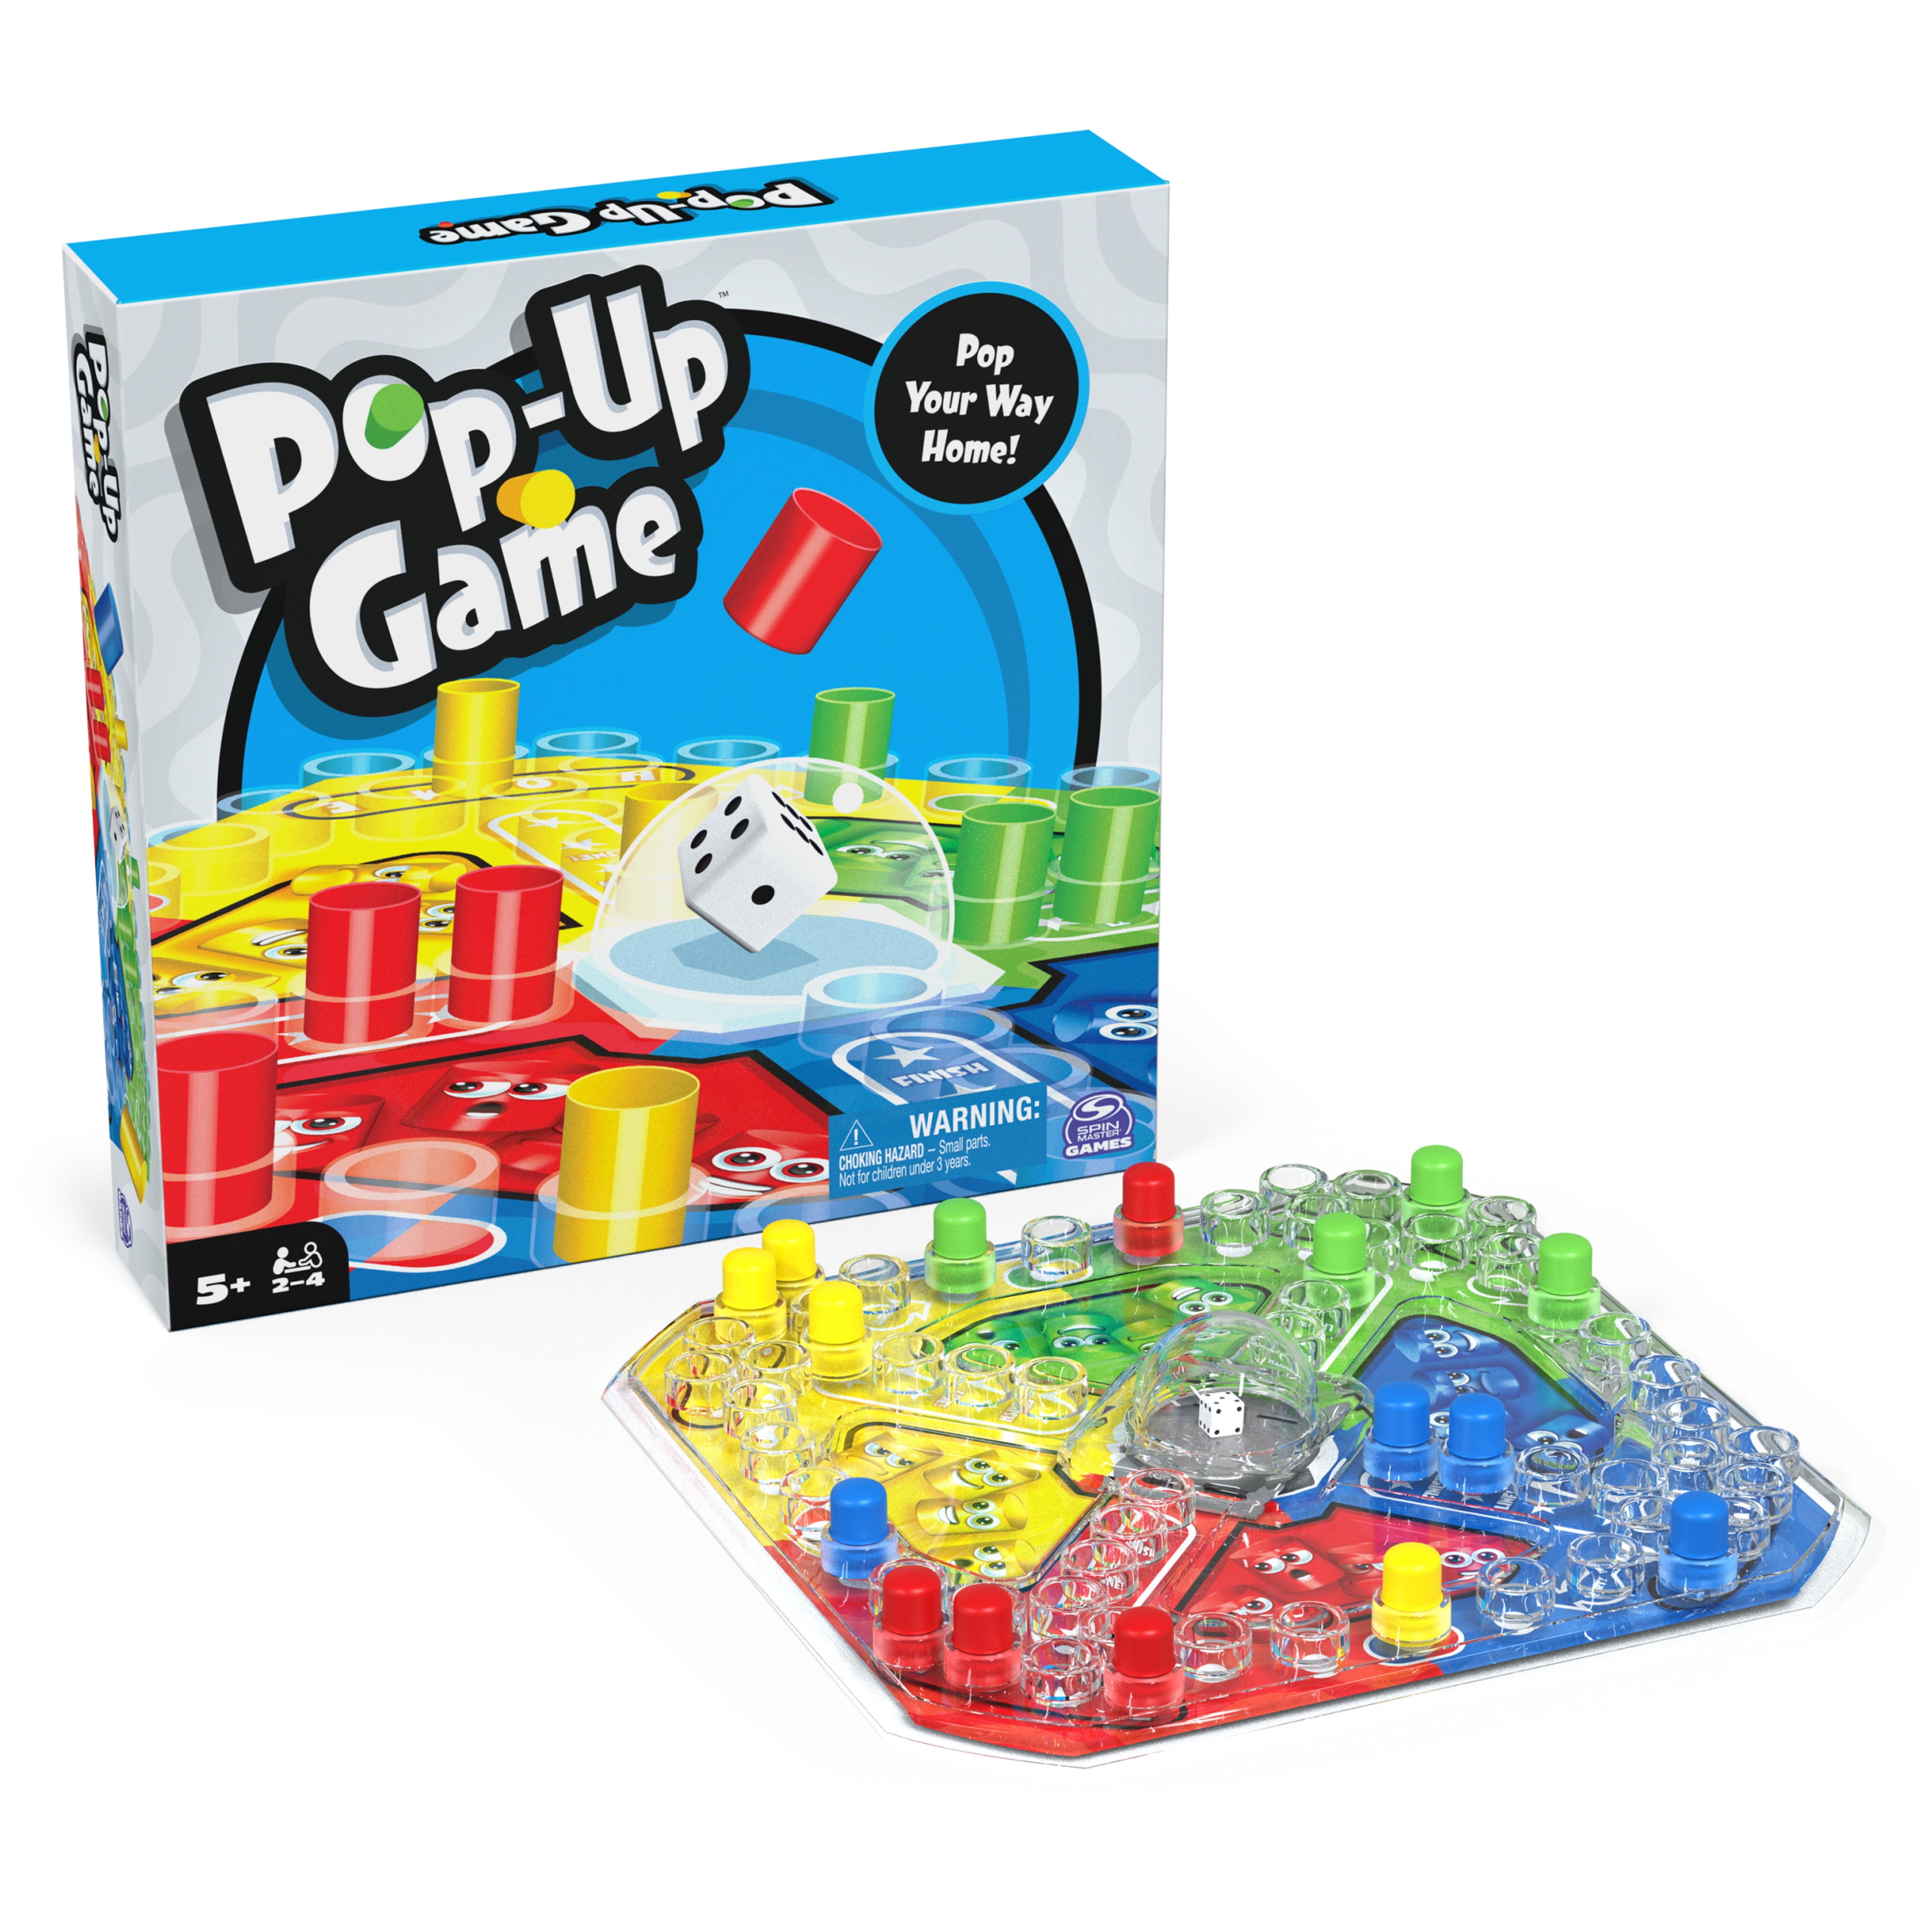 Tapple 10 - TRAVEL GAMES - Imagine That Toys